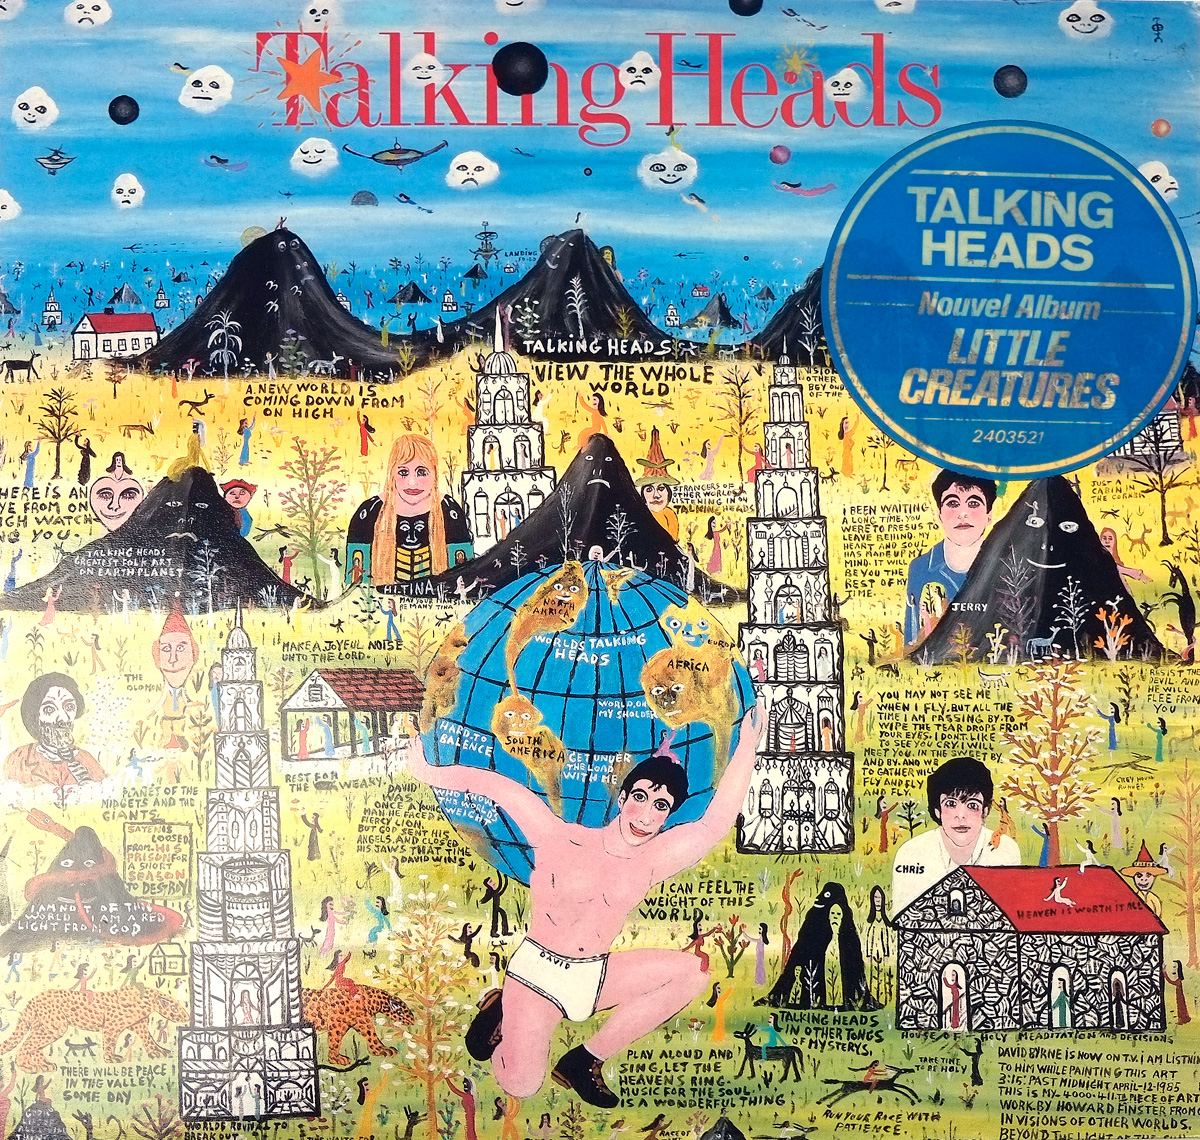 large photo of the album front cover of: TALKING HEADS Little Creatures 